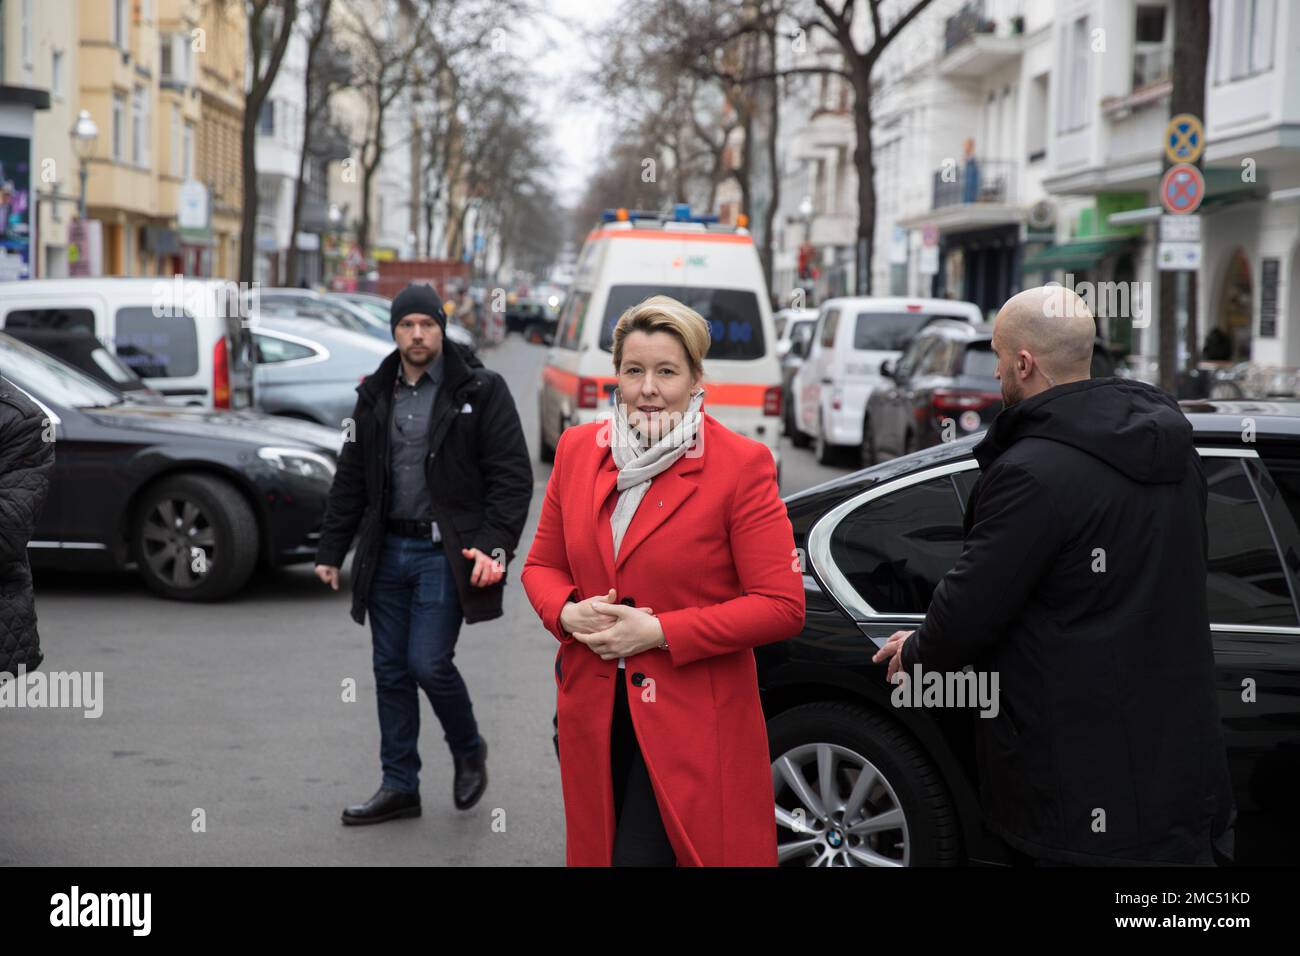 On January 21, 2023, the Governing Mayor of Berlin, Franziska Giffey, paid a visit to an election booth of the SPD (Social Democratic Party of Germany) in the city. The visit was part of the ongoing campaign for the 2023 Berlin repeat state election. Giffey, also an SPD member, took advantage of speaking with party members and supporters operating the booth. She also took the opportunity to meet with residents and listen to their concerns. She emphasized the importance of the SPD's commitment to social justice and fair economic policies, as well as its commitment to working toward a more susta Stock Photo